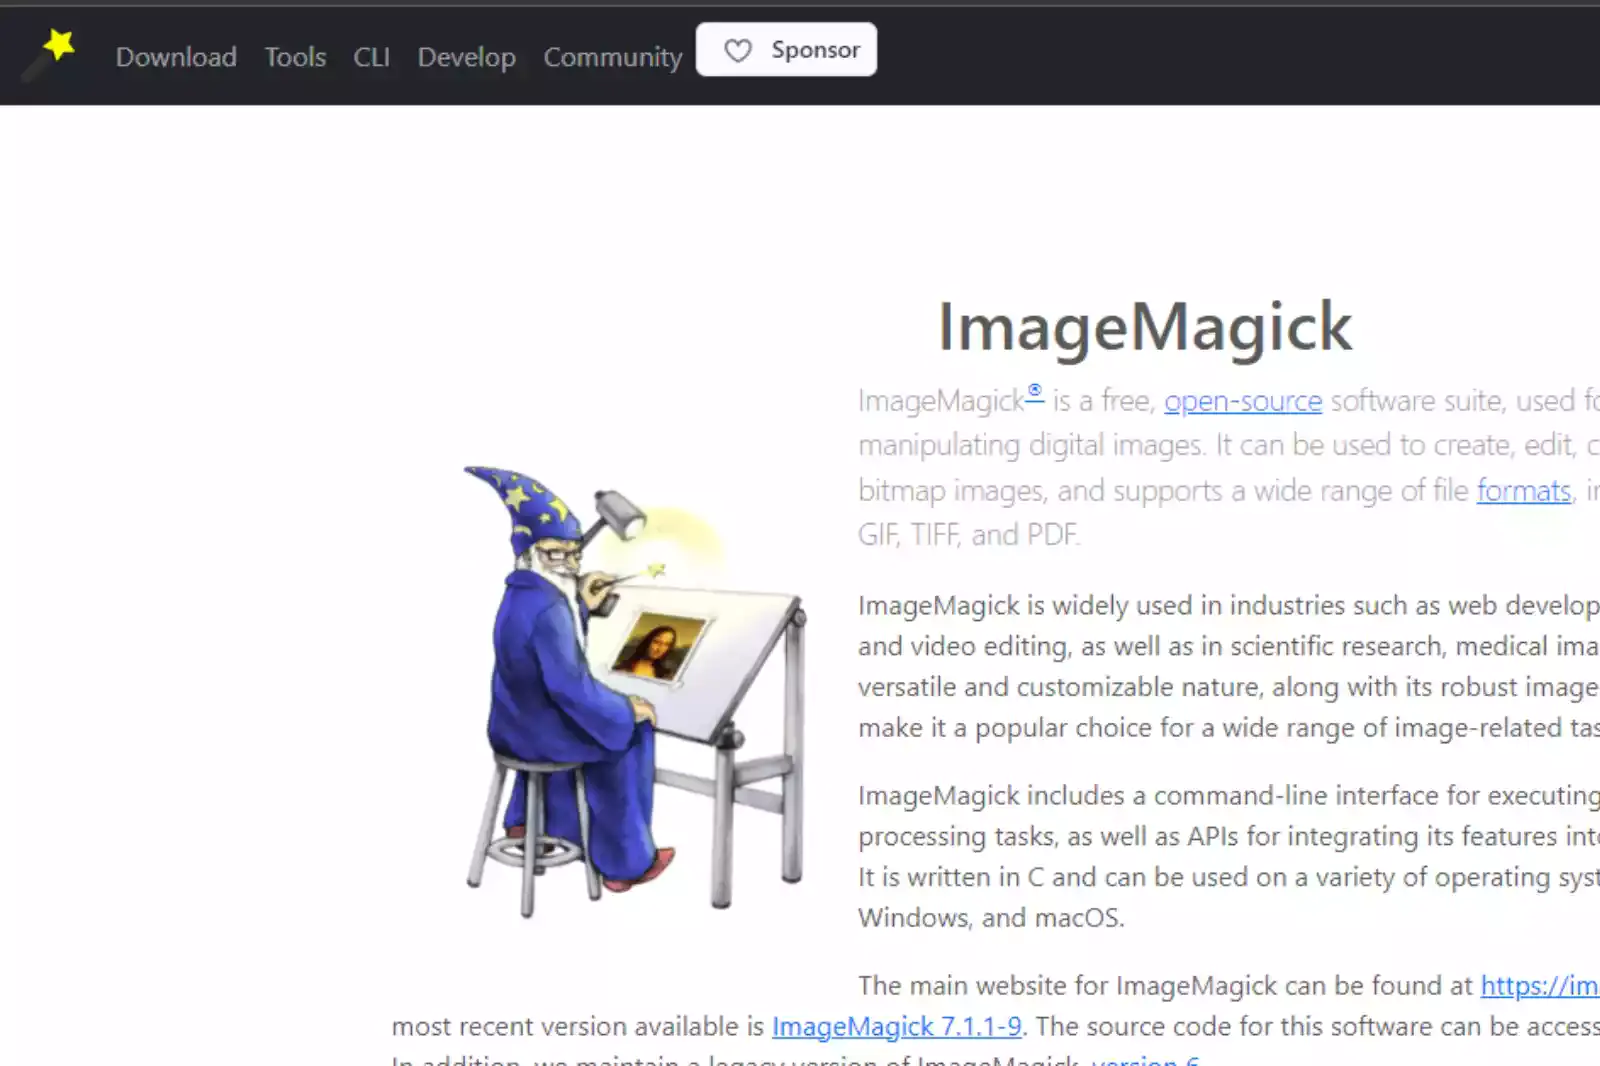 Home Page of ImageMagick